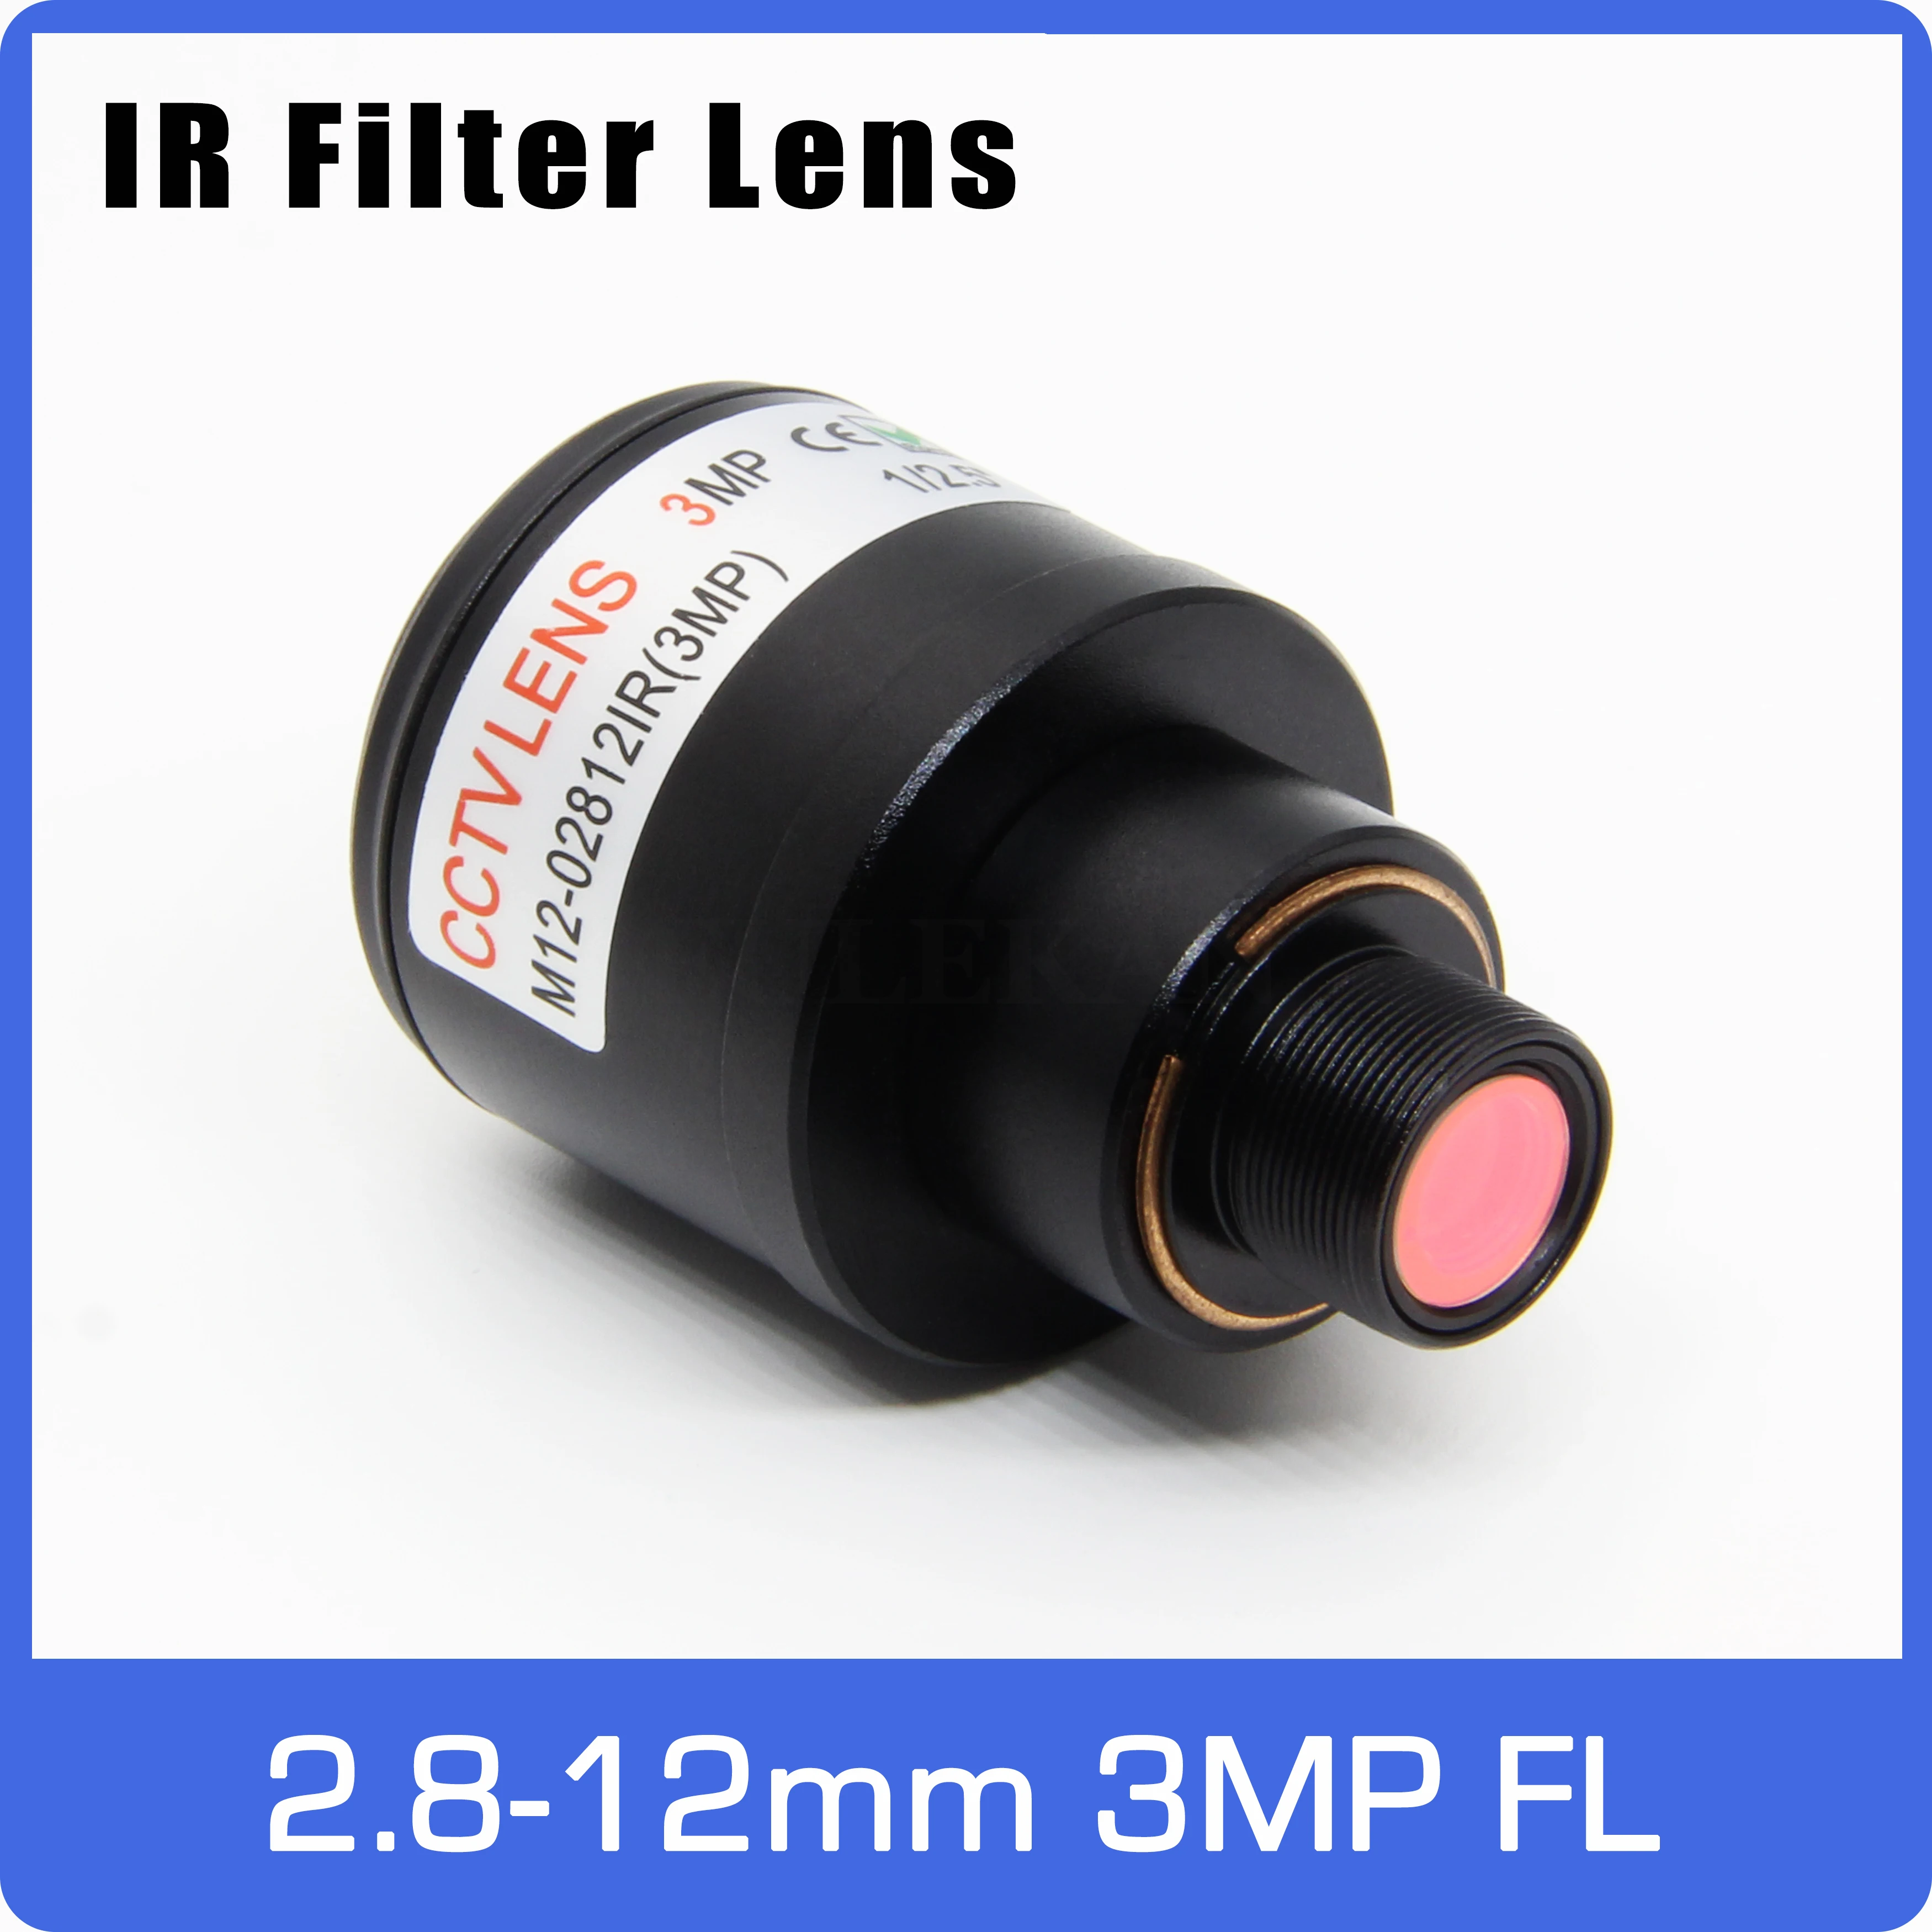 3Megapixel Varifocal Lens With IR Filter 2.8-12mm M12 Mount 1/2.5 inch Manual Focus and Zoom For Action Camera Sports Camera